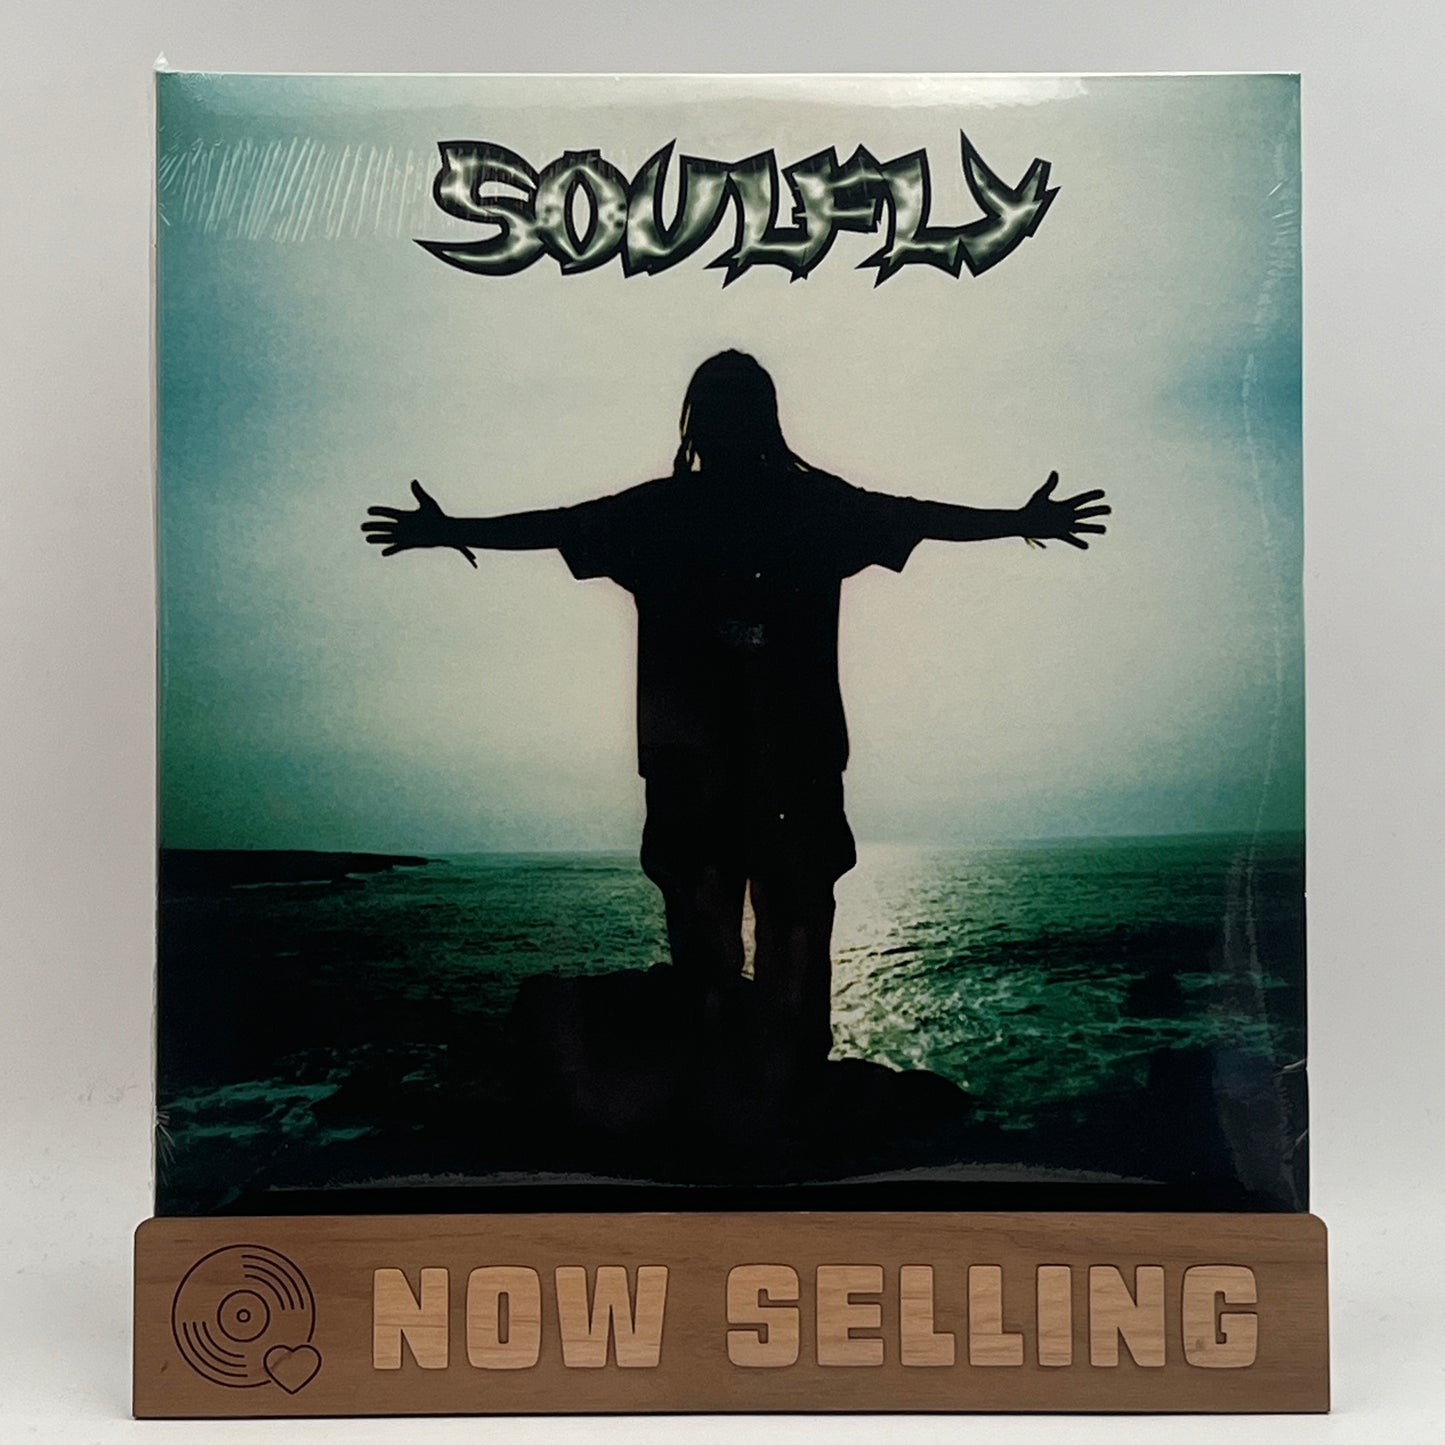 Soulfly - Soulfly Self Titled Vinyl LP Reissue SEALED